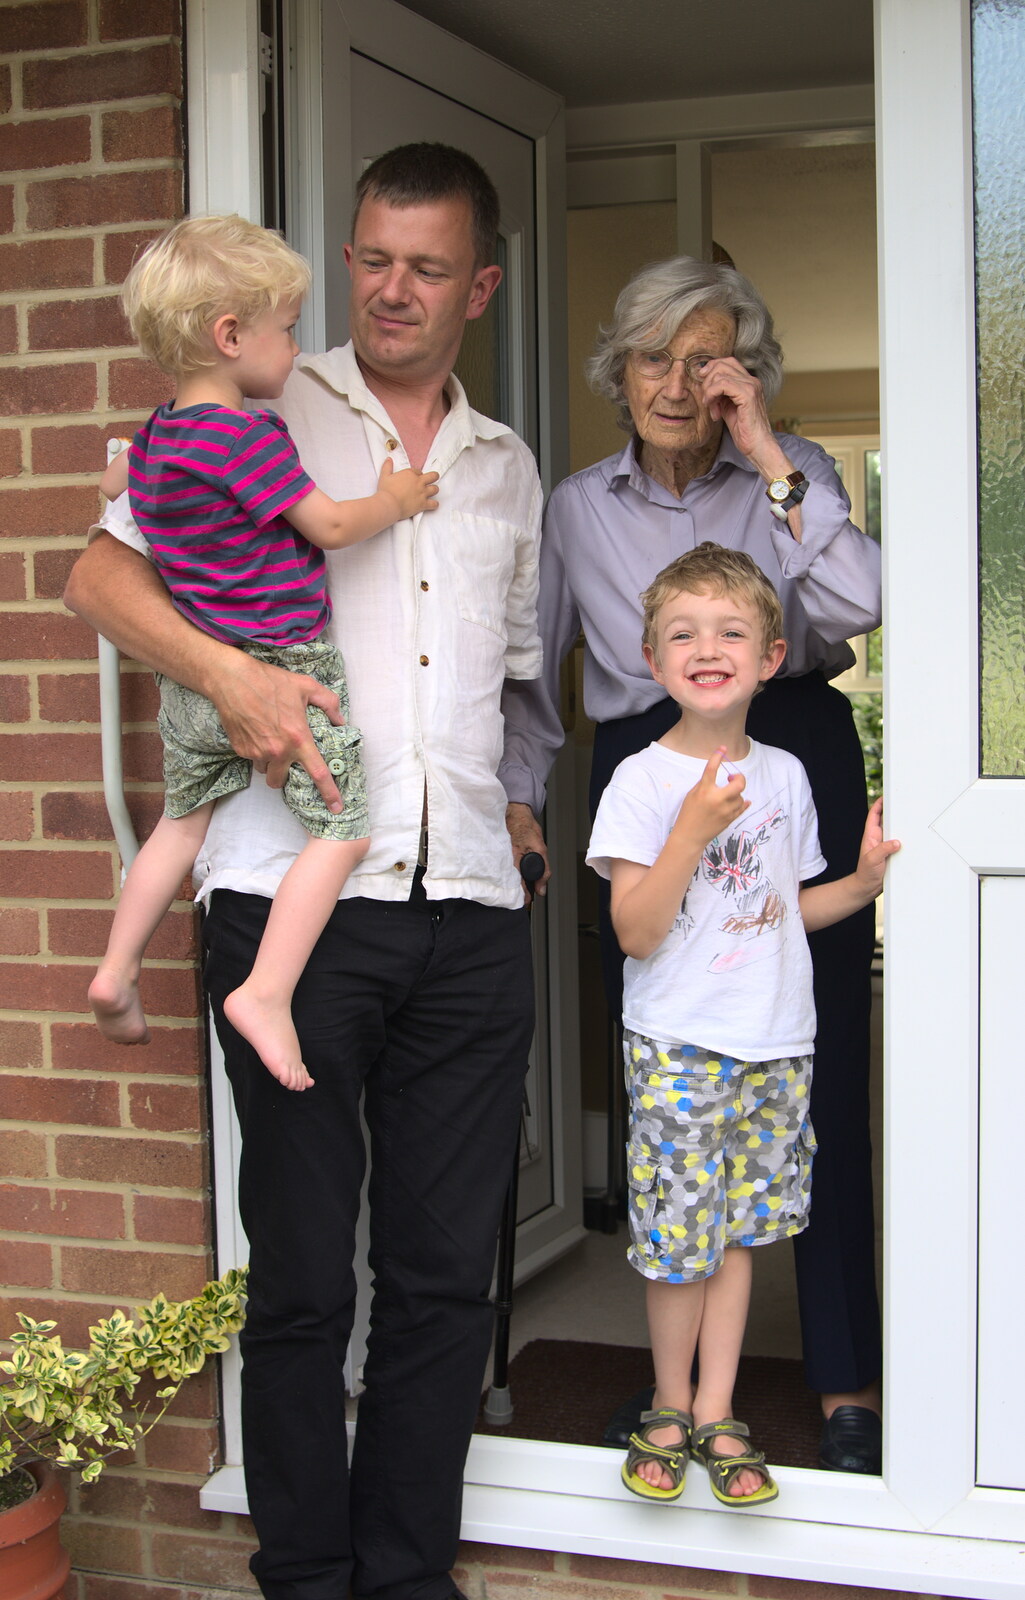 Nosher, G and the boys from Bob and Bernice's 50th Wedding Anniversary, Hinton Admiral, Dorset - 25th July 2014